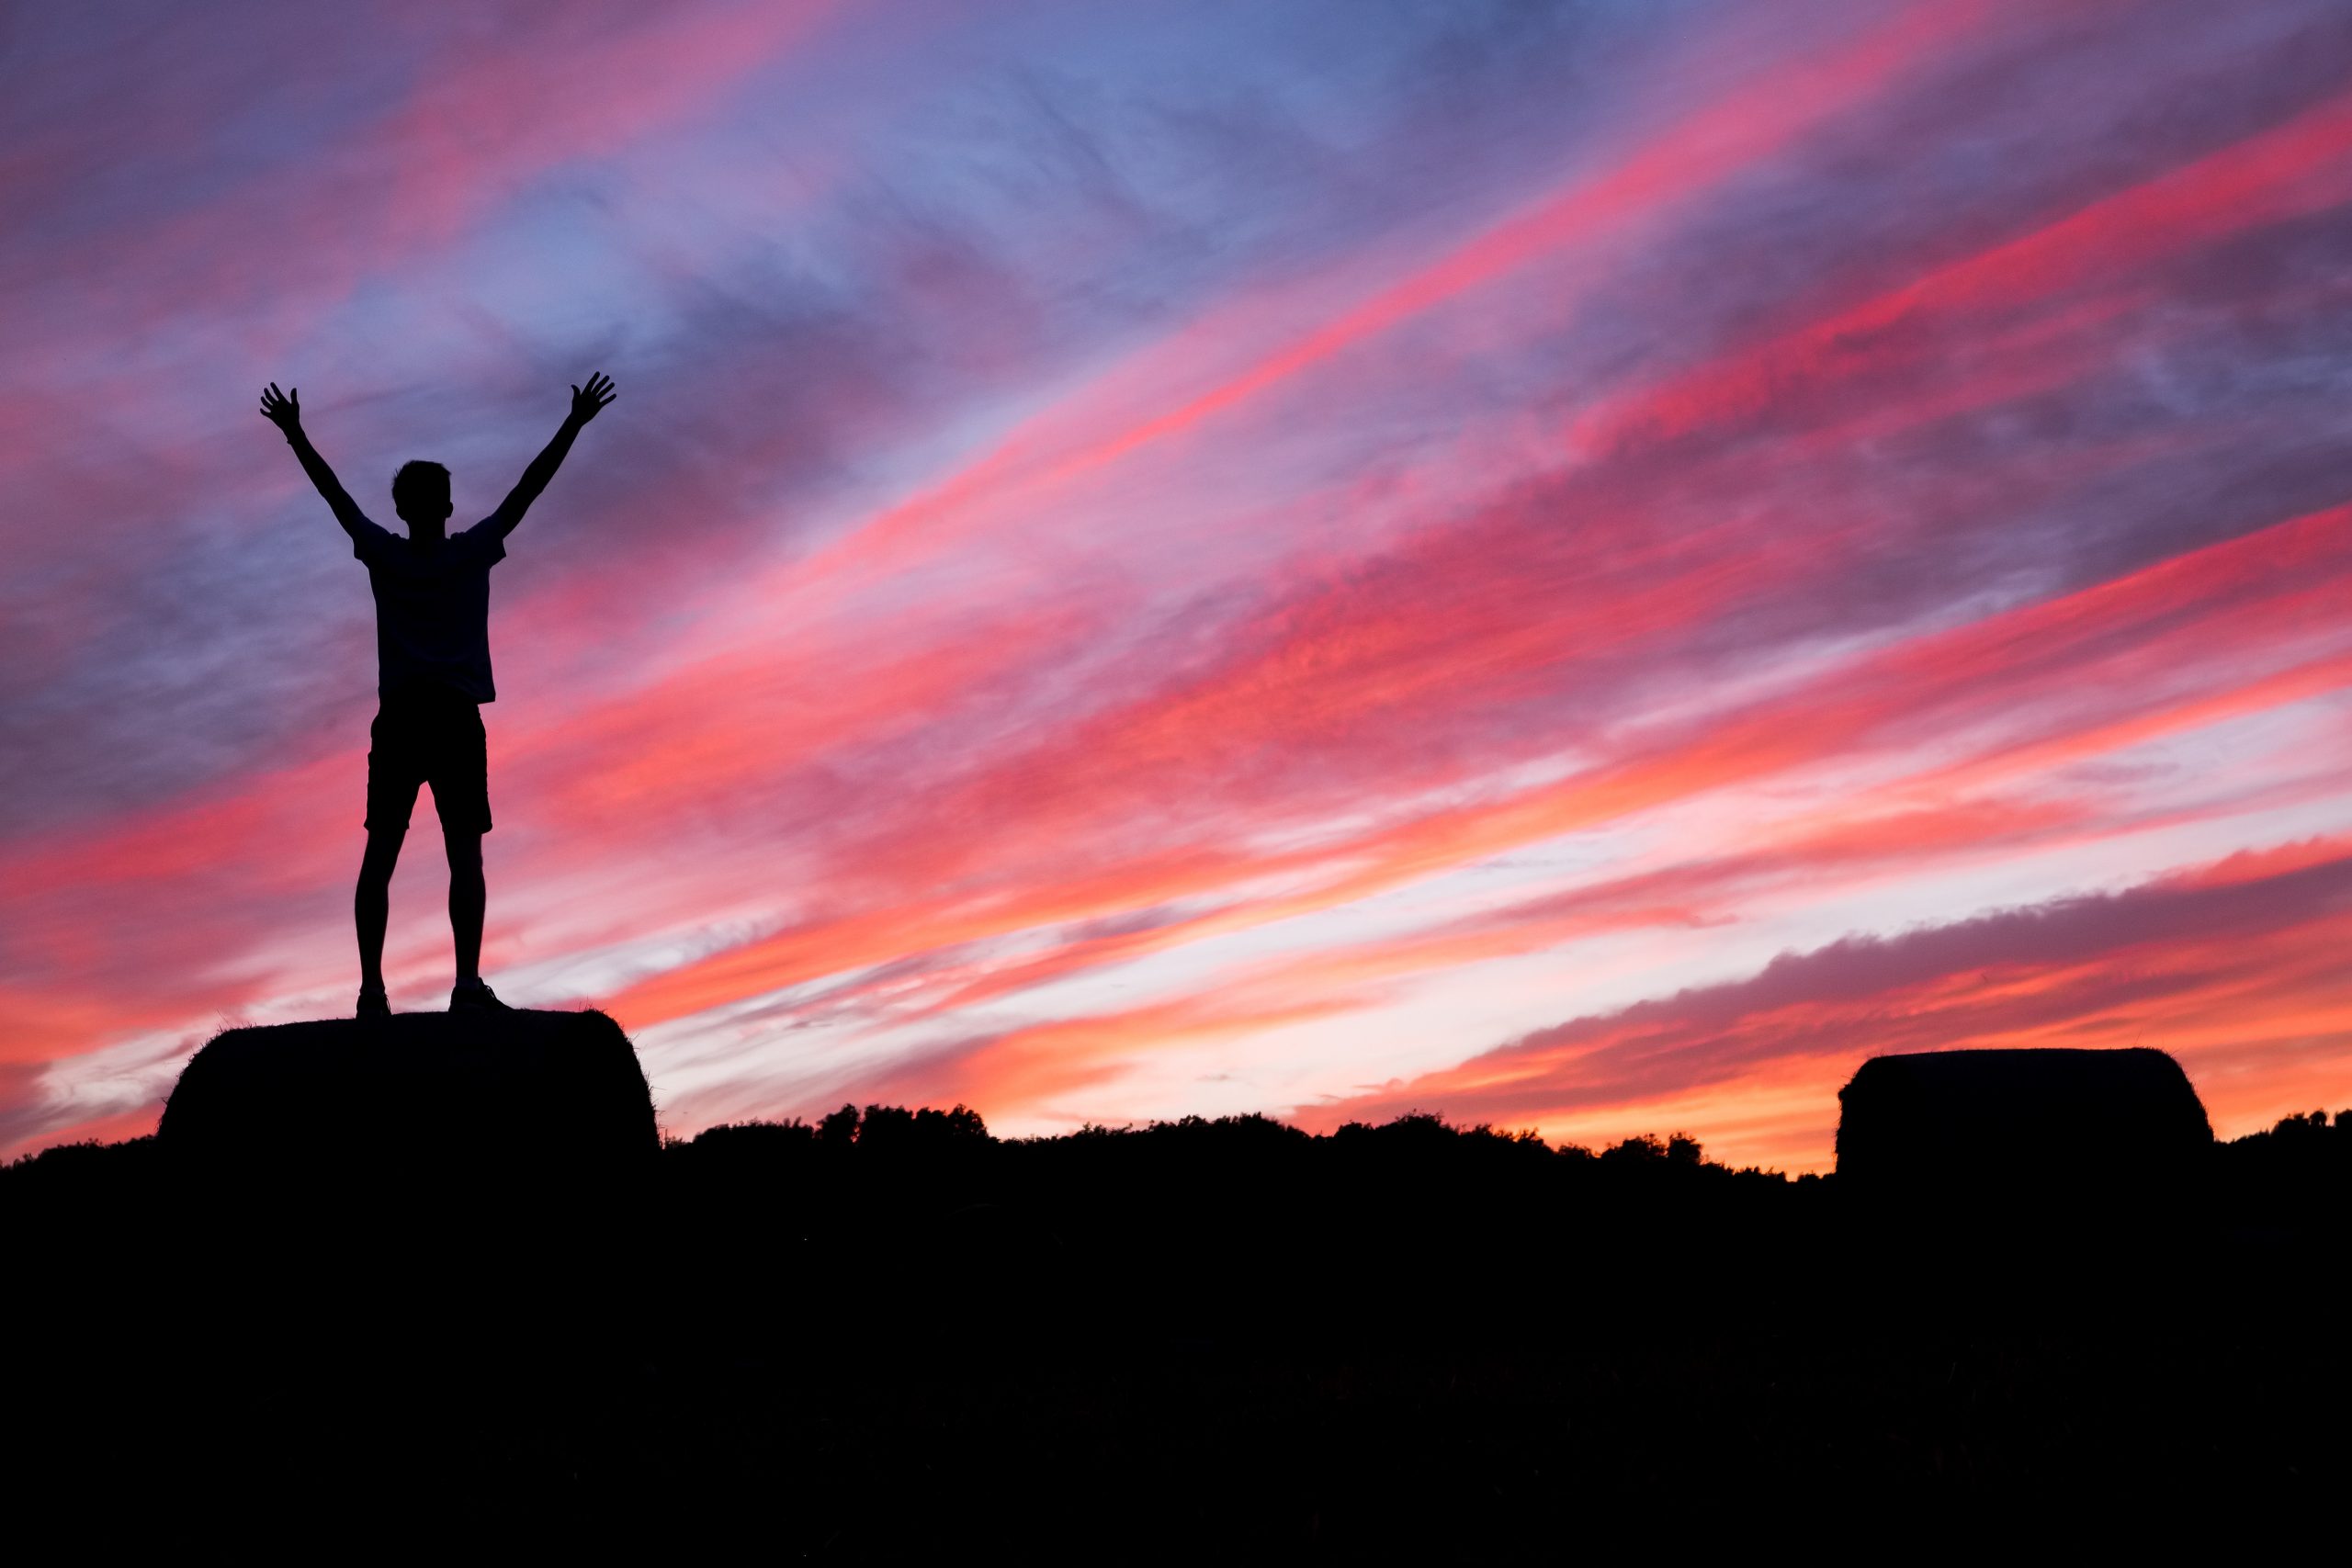 Silhouette of a person with arms raised against a vibrant sunset sky.